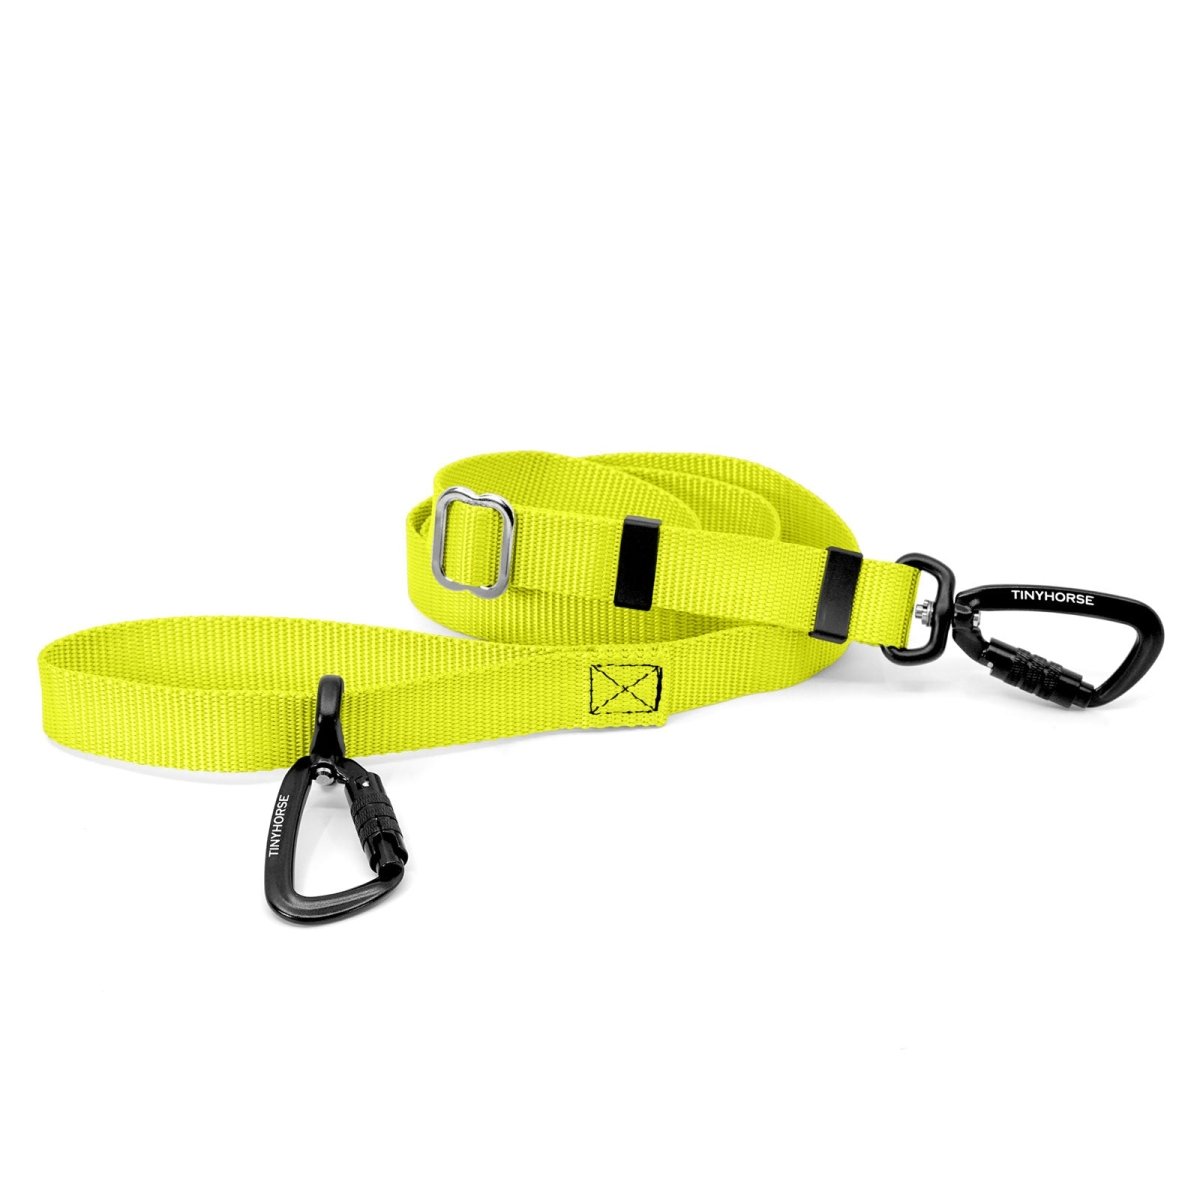 A neon yellow-coloured Lead-All Lite Extra with an adjustable nylon webbing leash and 2 auto-locking carabiners